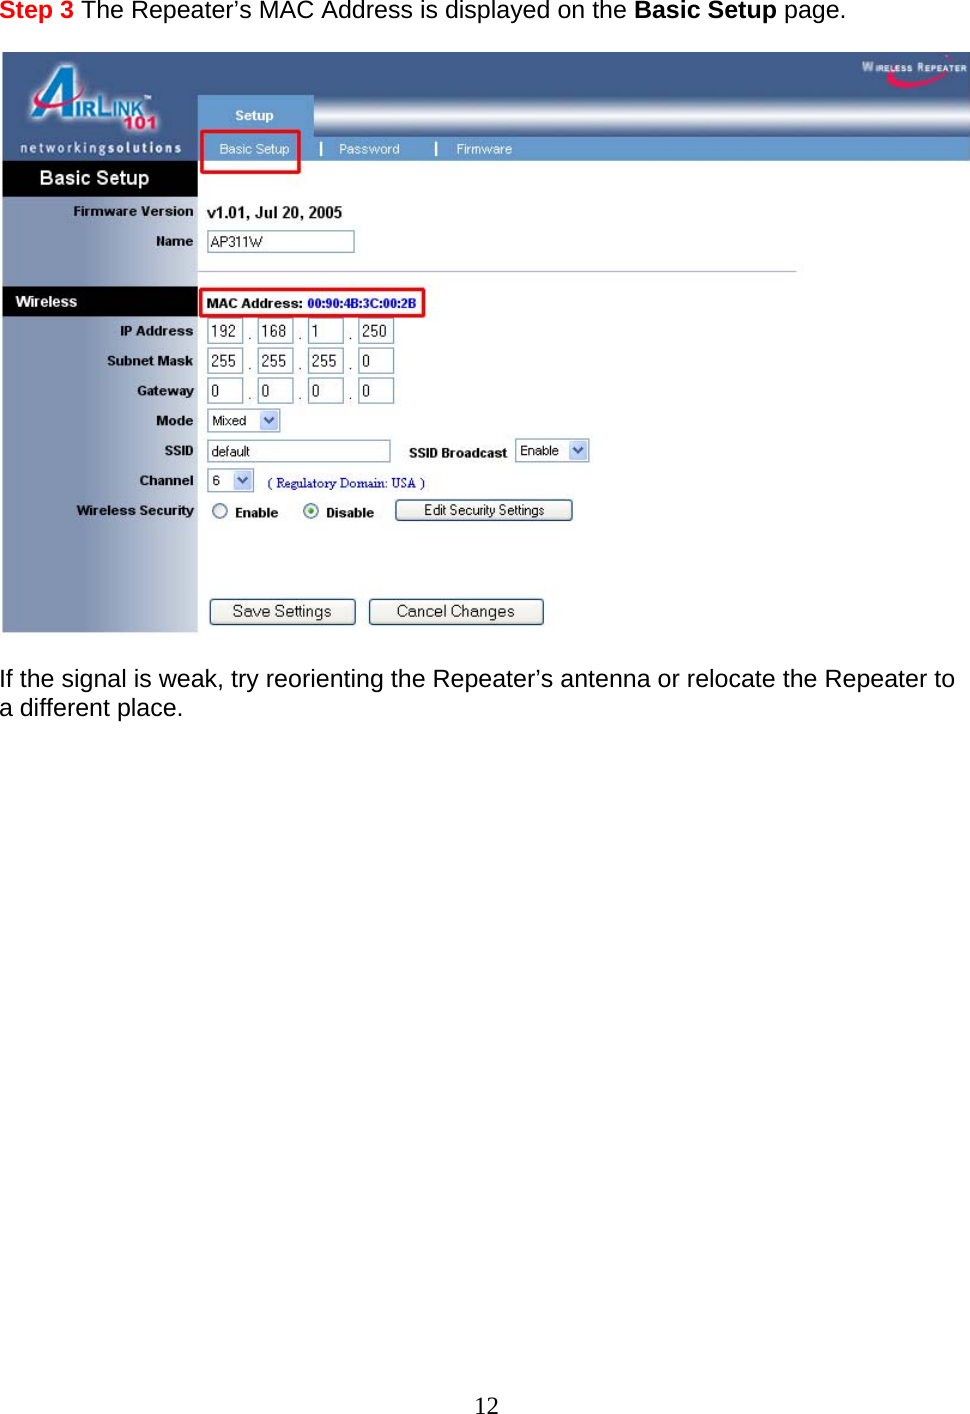 12 Step 3 The Repeater’s MAC Address is displayed on the Basic Setup page.    If the signal is weak, try reorienting the Repeater’s antenna or relocate the Repeater to a different place.                      